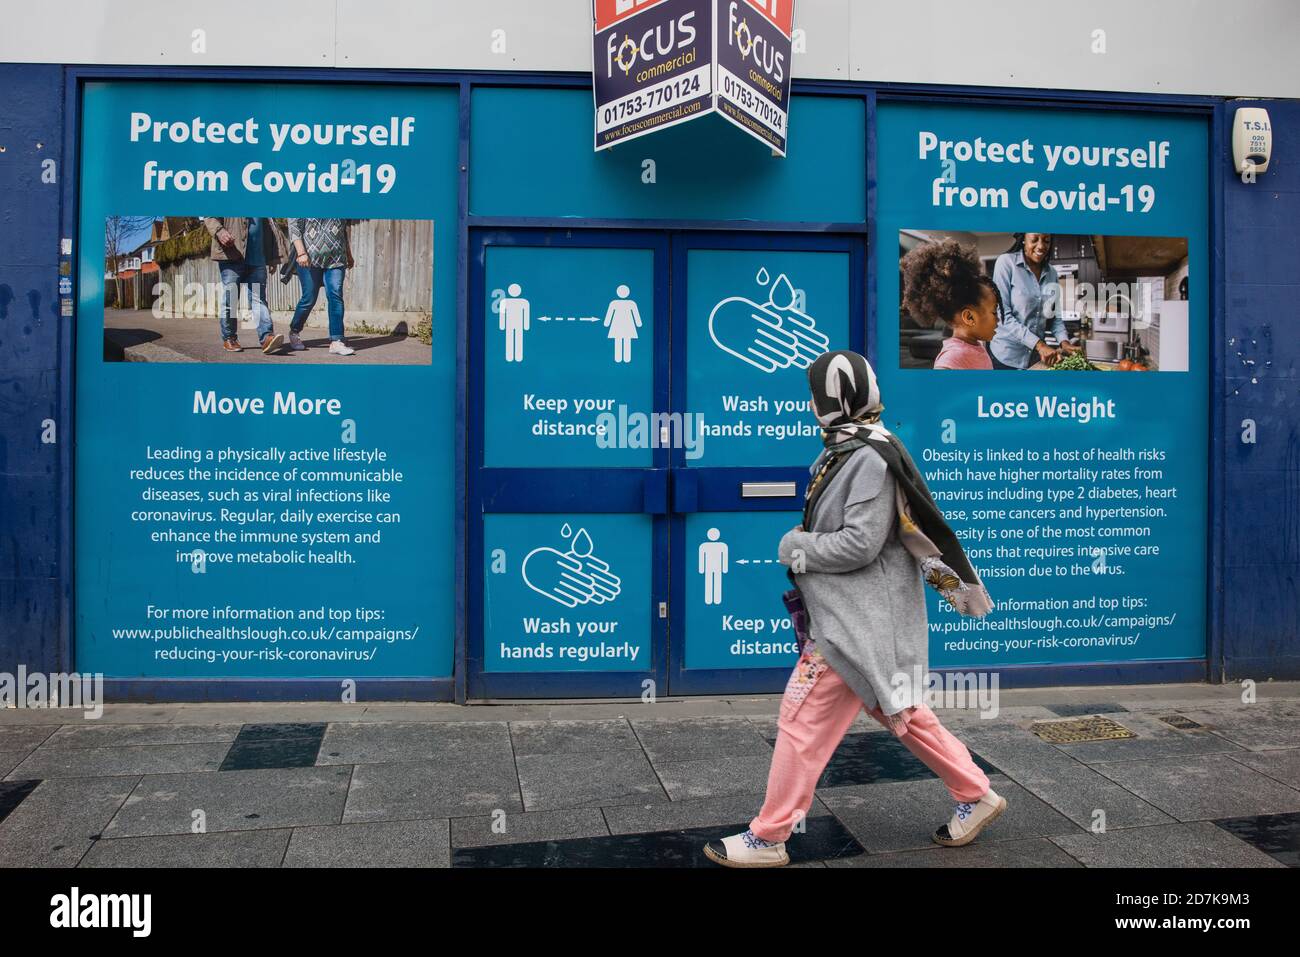 Slough, UK. 23rd October, 2020. A woman wears a face covering to help prevent the spread of the coronavirus. The Government has announced that Slough will change its COVID Alert Level status from Tier 1 Medium Alert to Tier 2 High Alert with effect from 00:01 on Saturday 24 October following a sustained rise in COVID-19 cases resulting in an infection rate of 153 cases per 100,000. Credit: Mark Kerrison/Alamy Live News Stock Photo